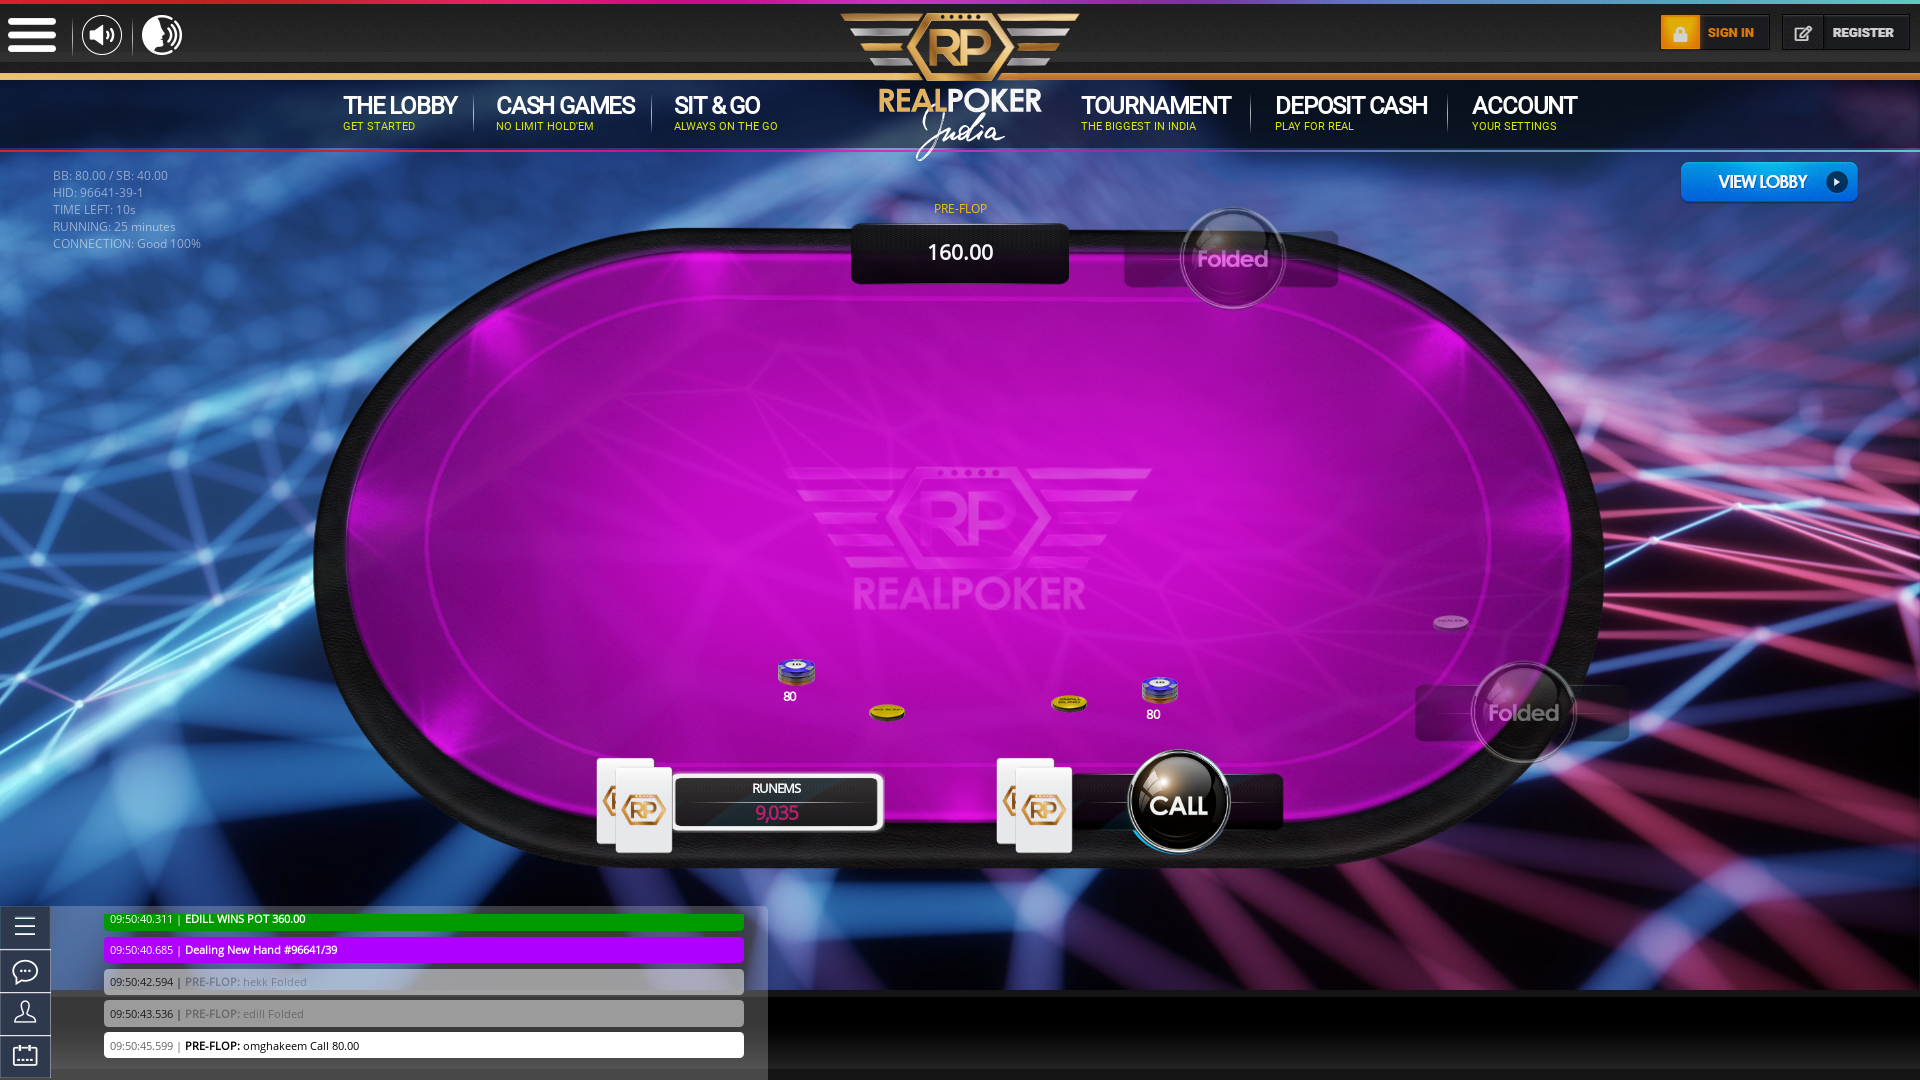 Real poker 10 player table in the 25th minute of the match